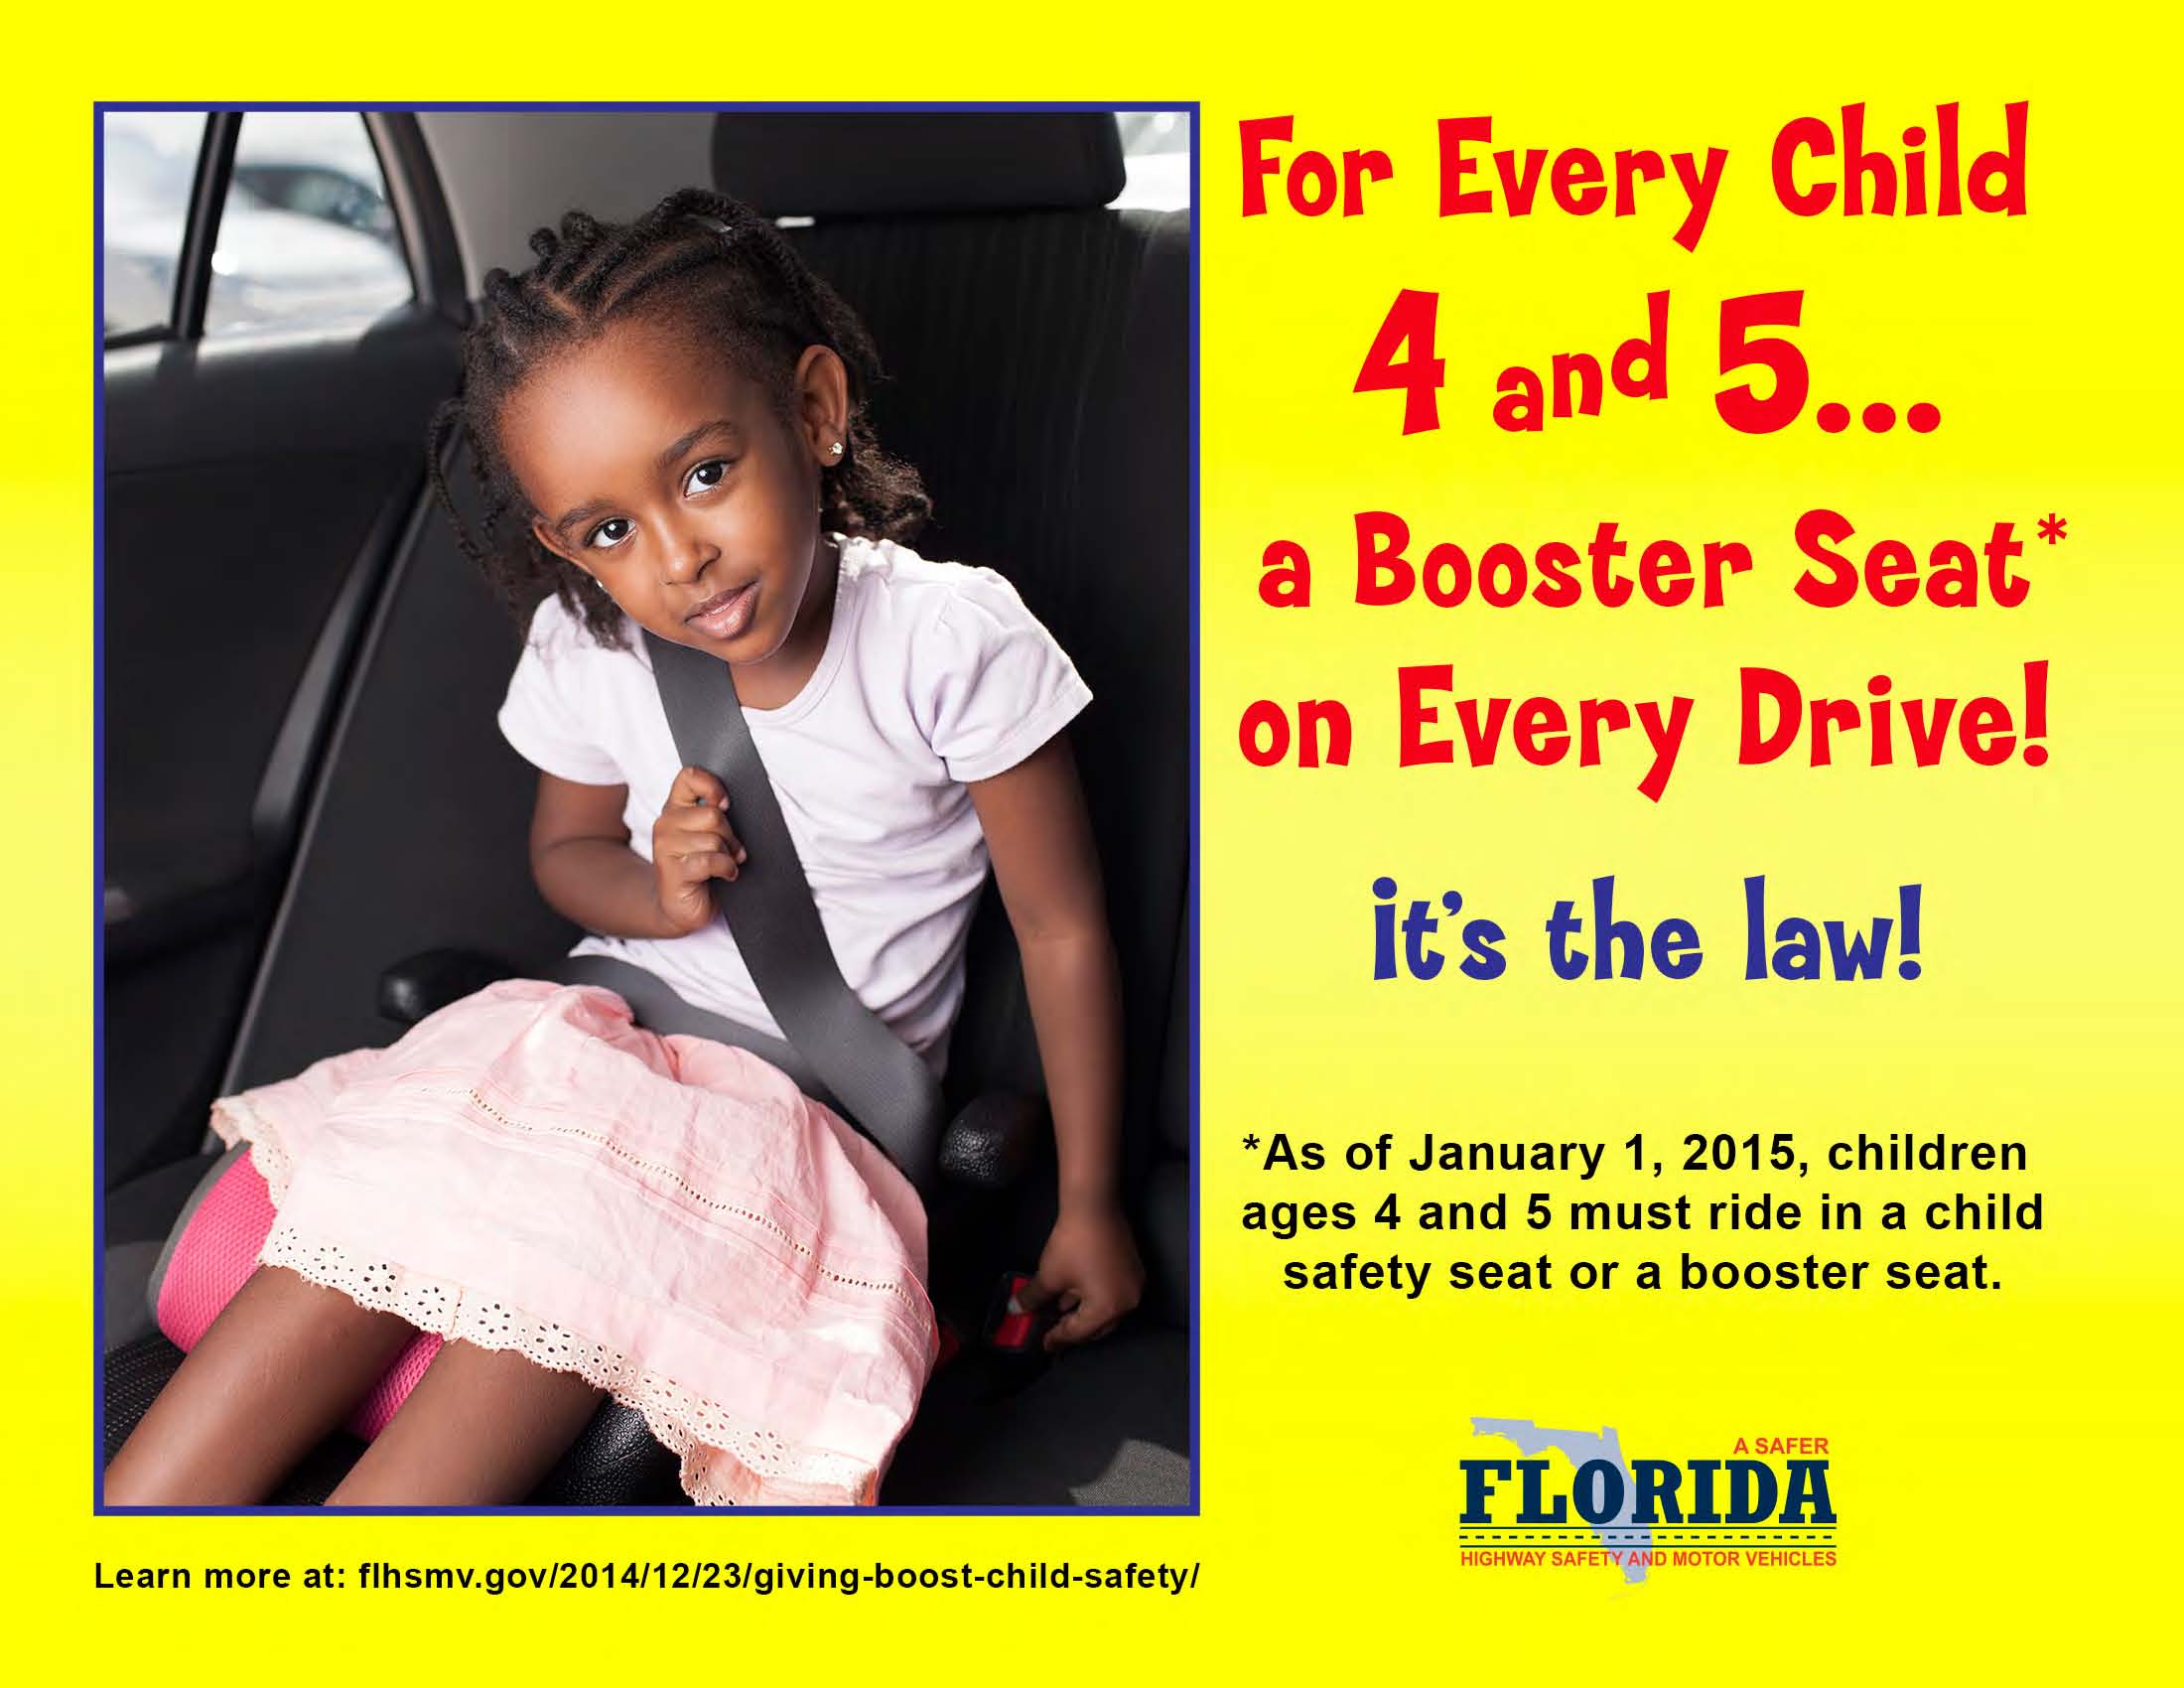 Florida Car Seat Laws 2022 Cur Safety Resources For Pas Safe Convertible Seats - What Is The Height And Weight Requirement For A Booster Seat In Florida